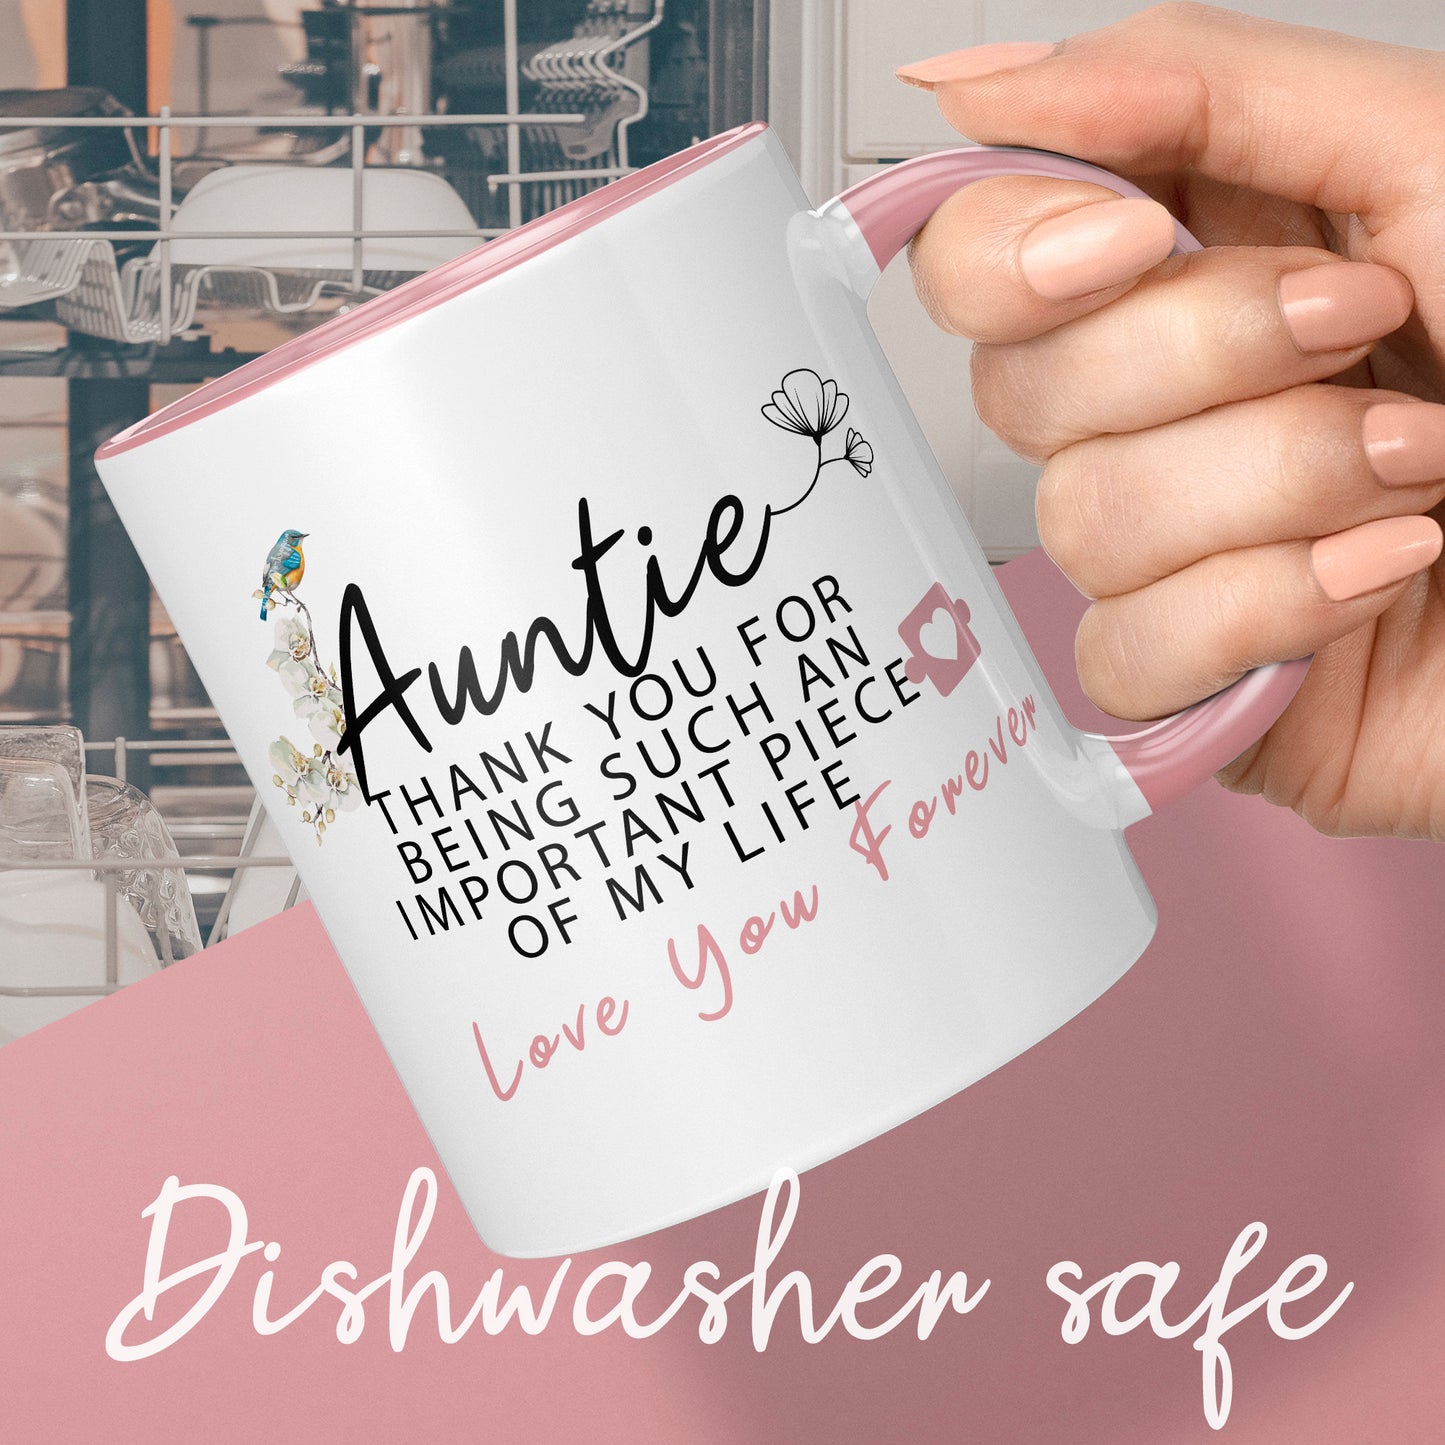 Auntie Gift special Auntie auntie mug auntie to be